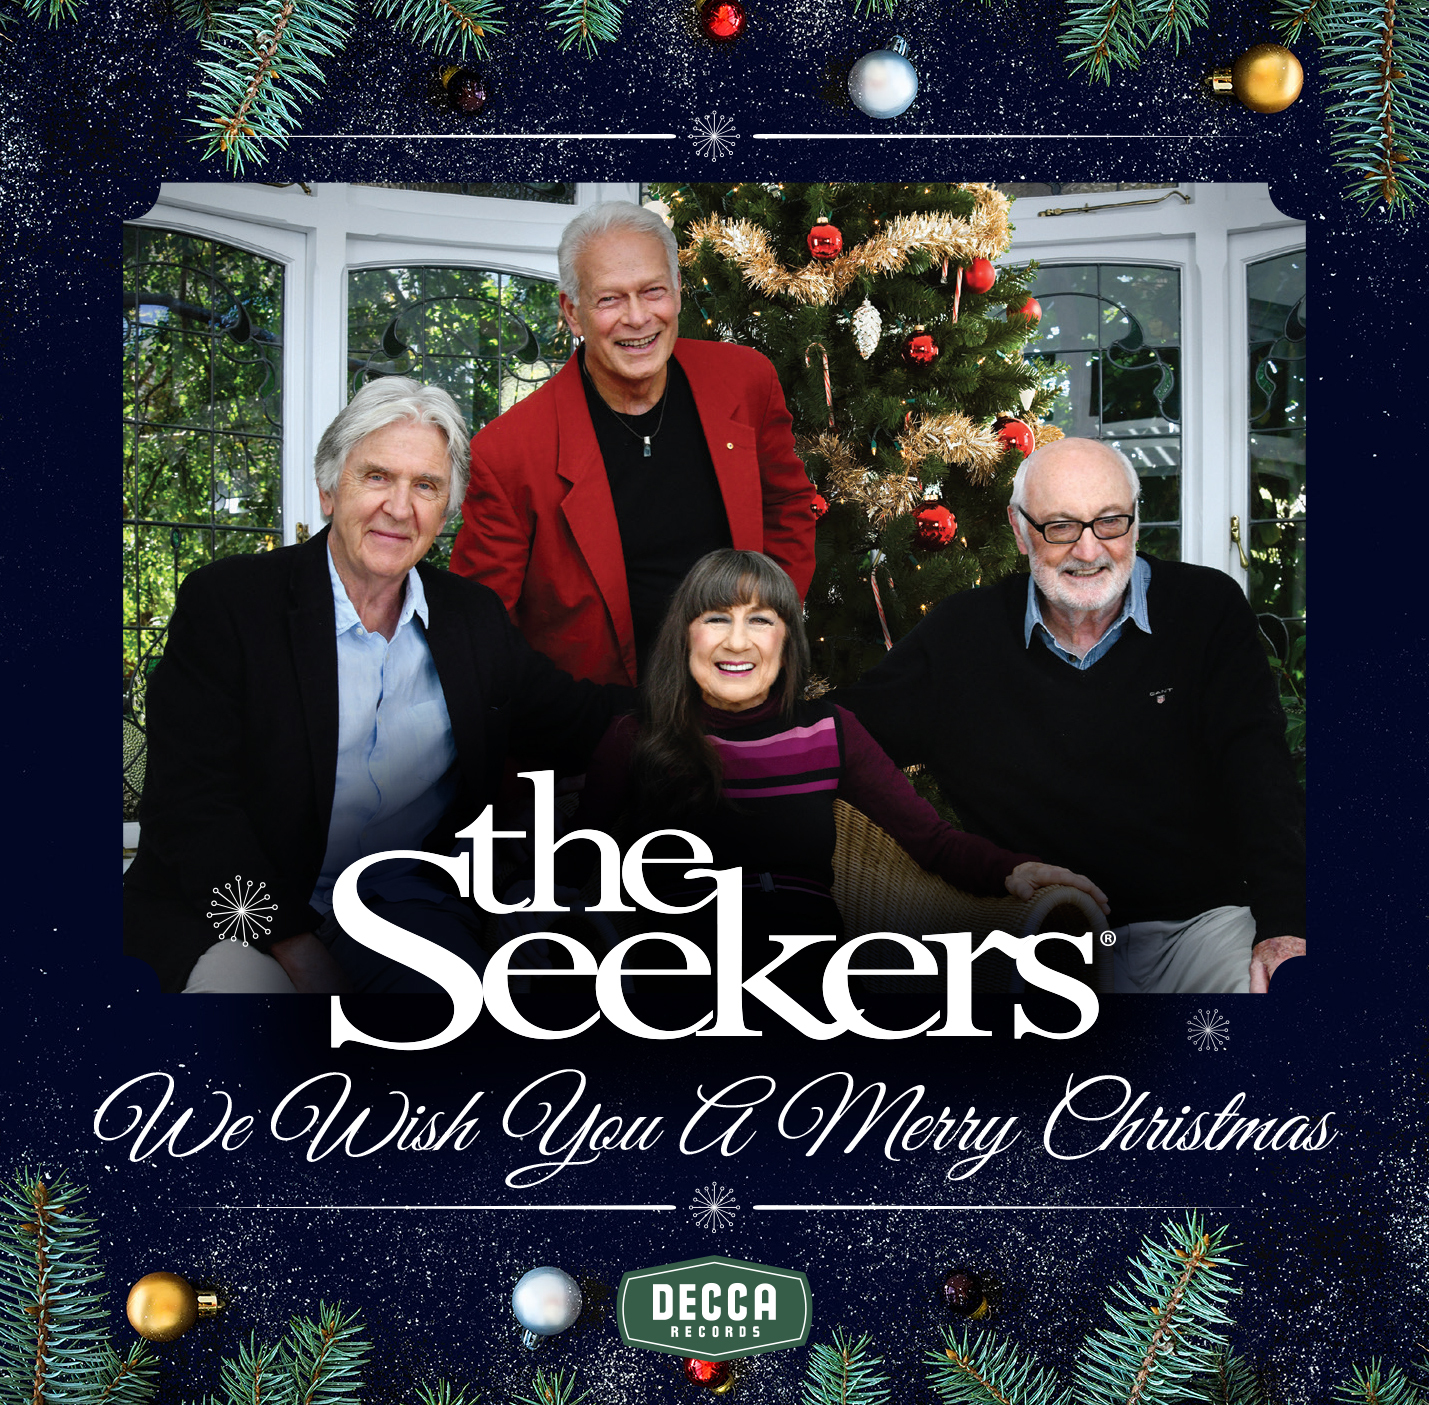 Christmas with The Seekers